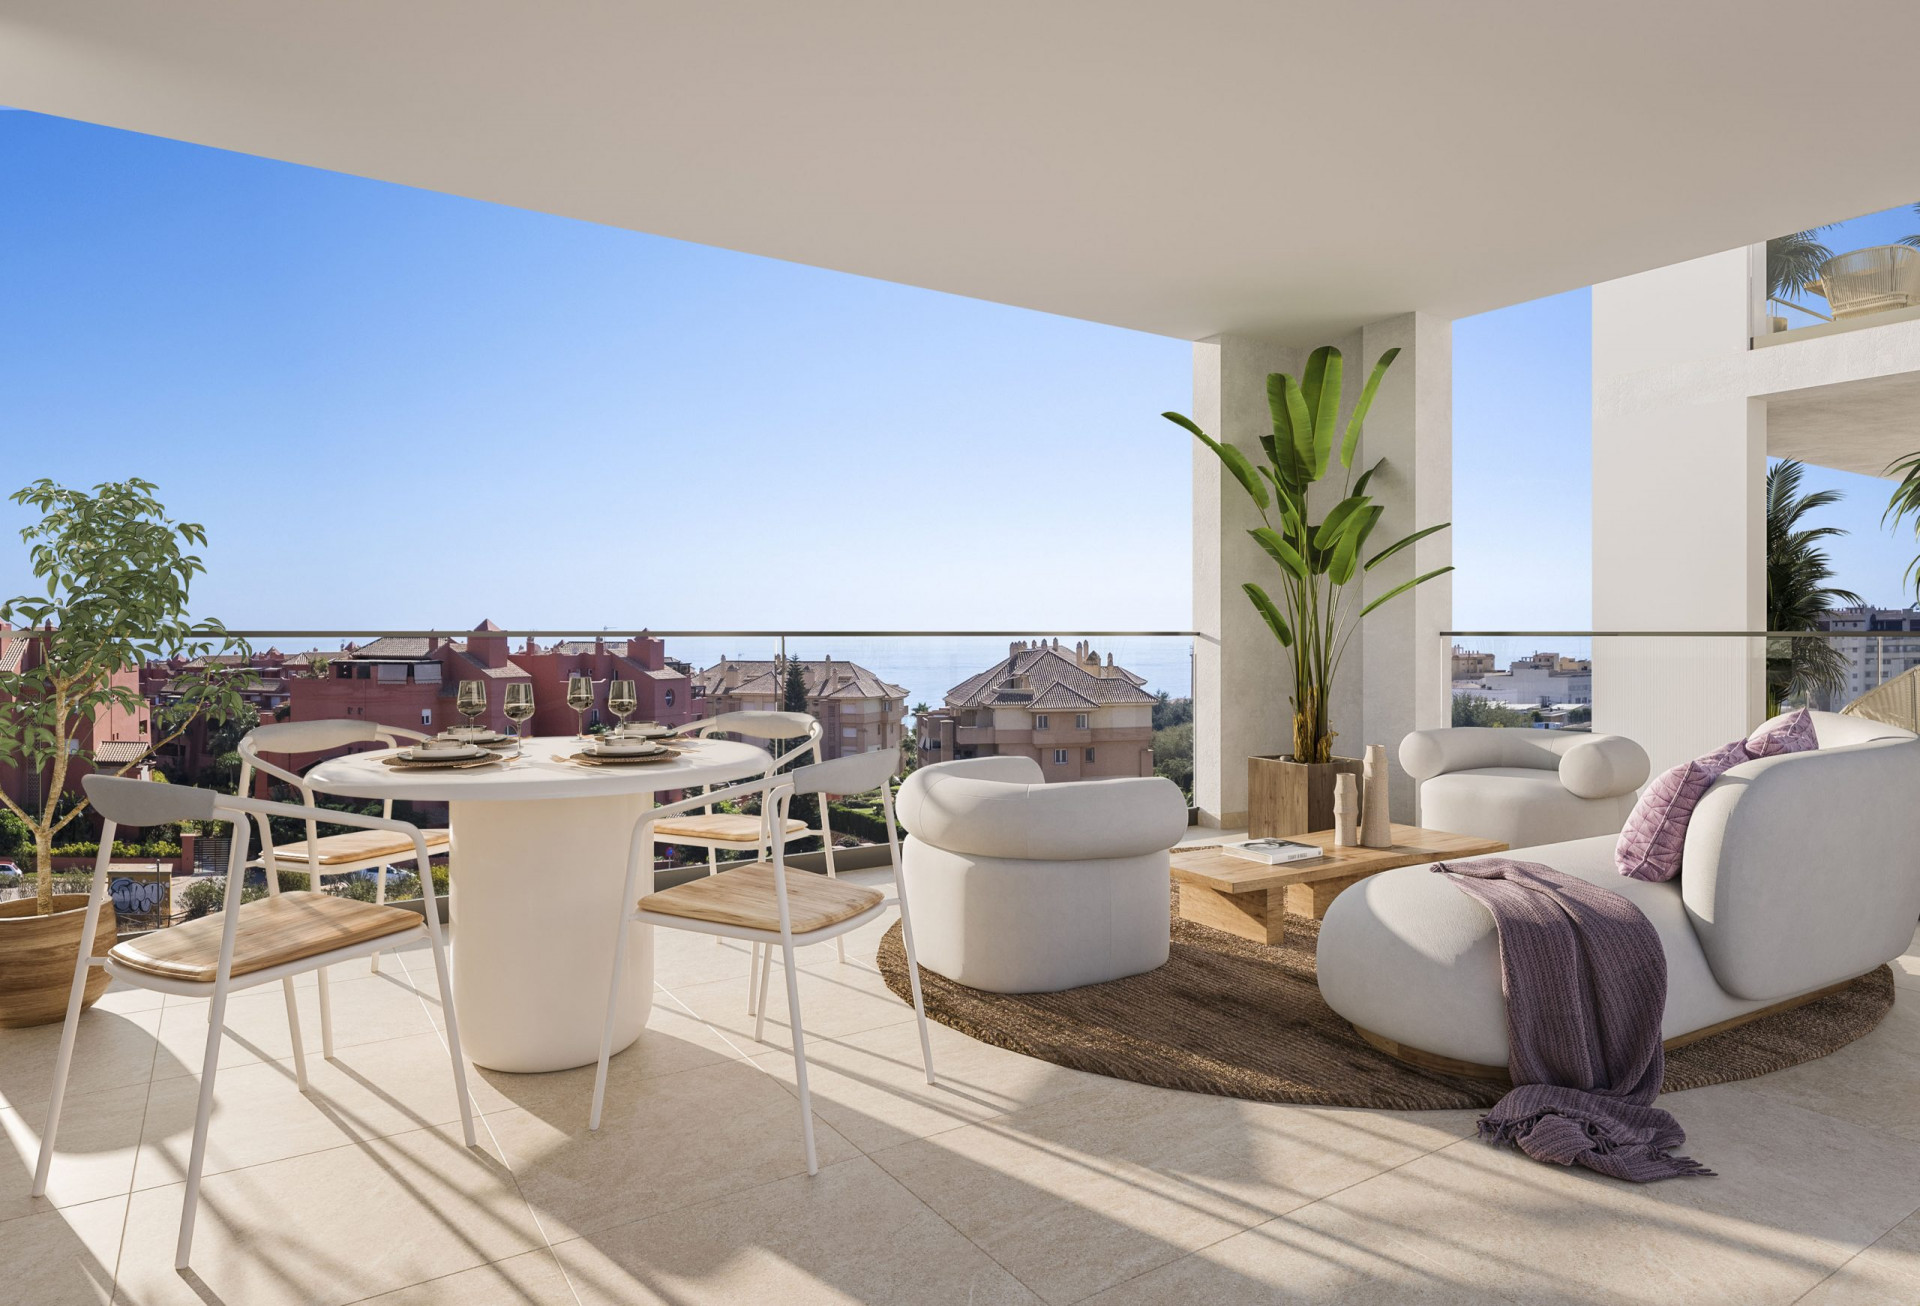 Three bedroom flat with private terraces with sea views in Torrox, Malaga. | Image 1